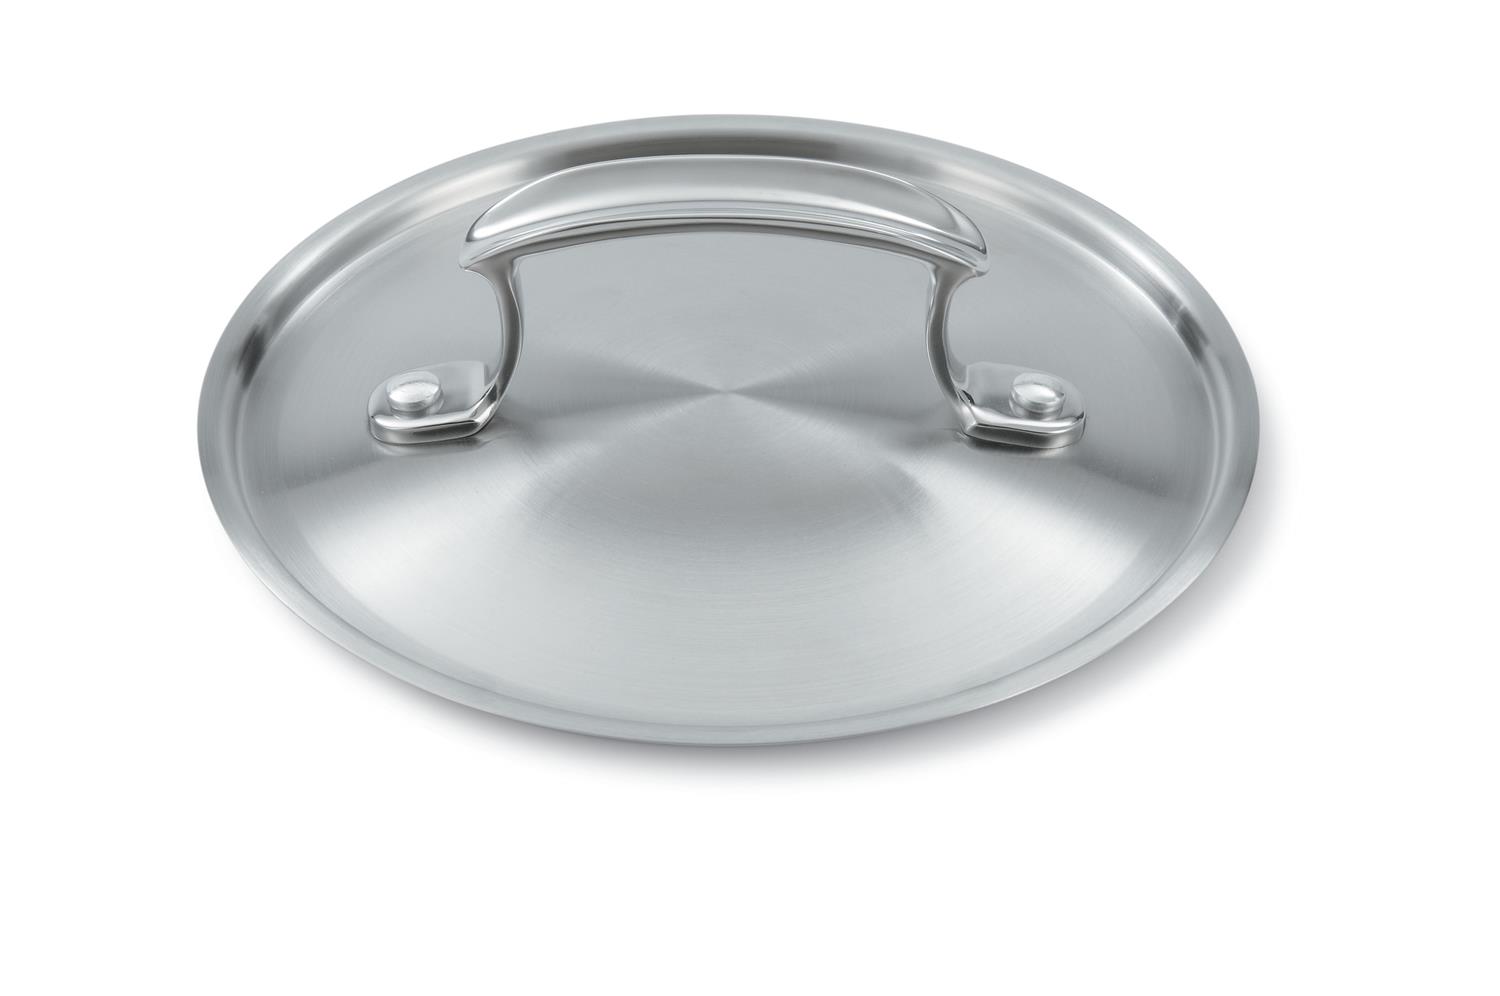 Vollrath 49415 Miramar Display Cookware, Low Dome Cover